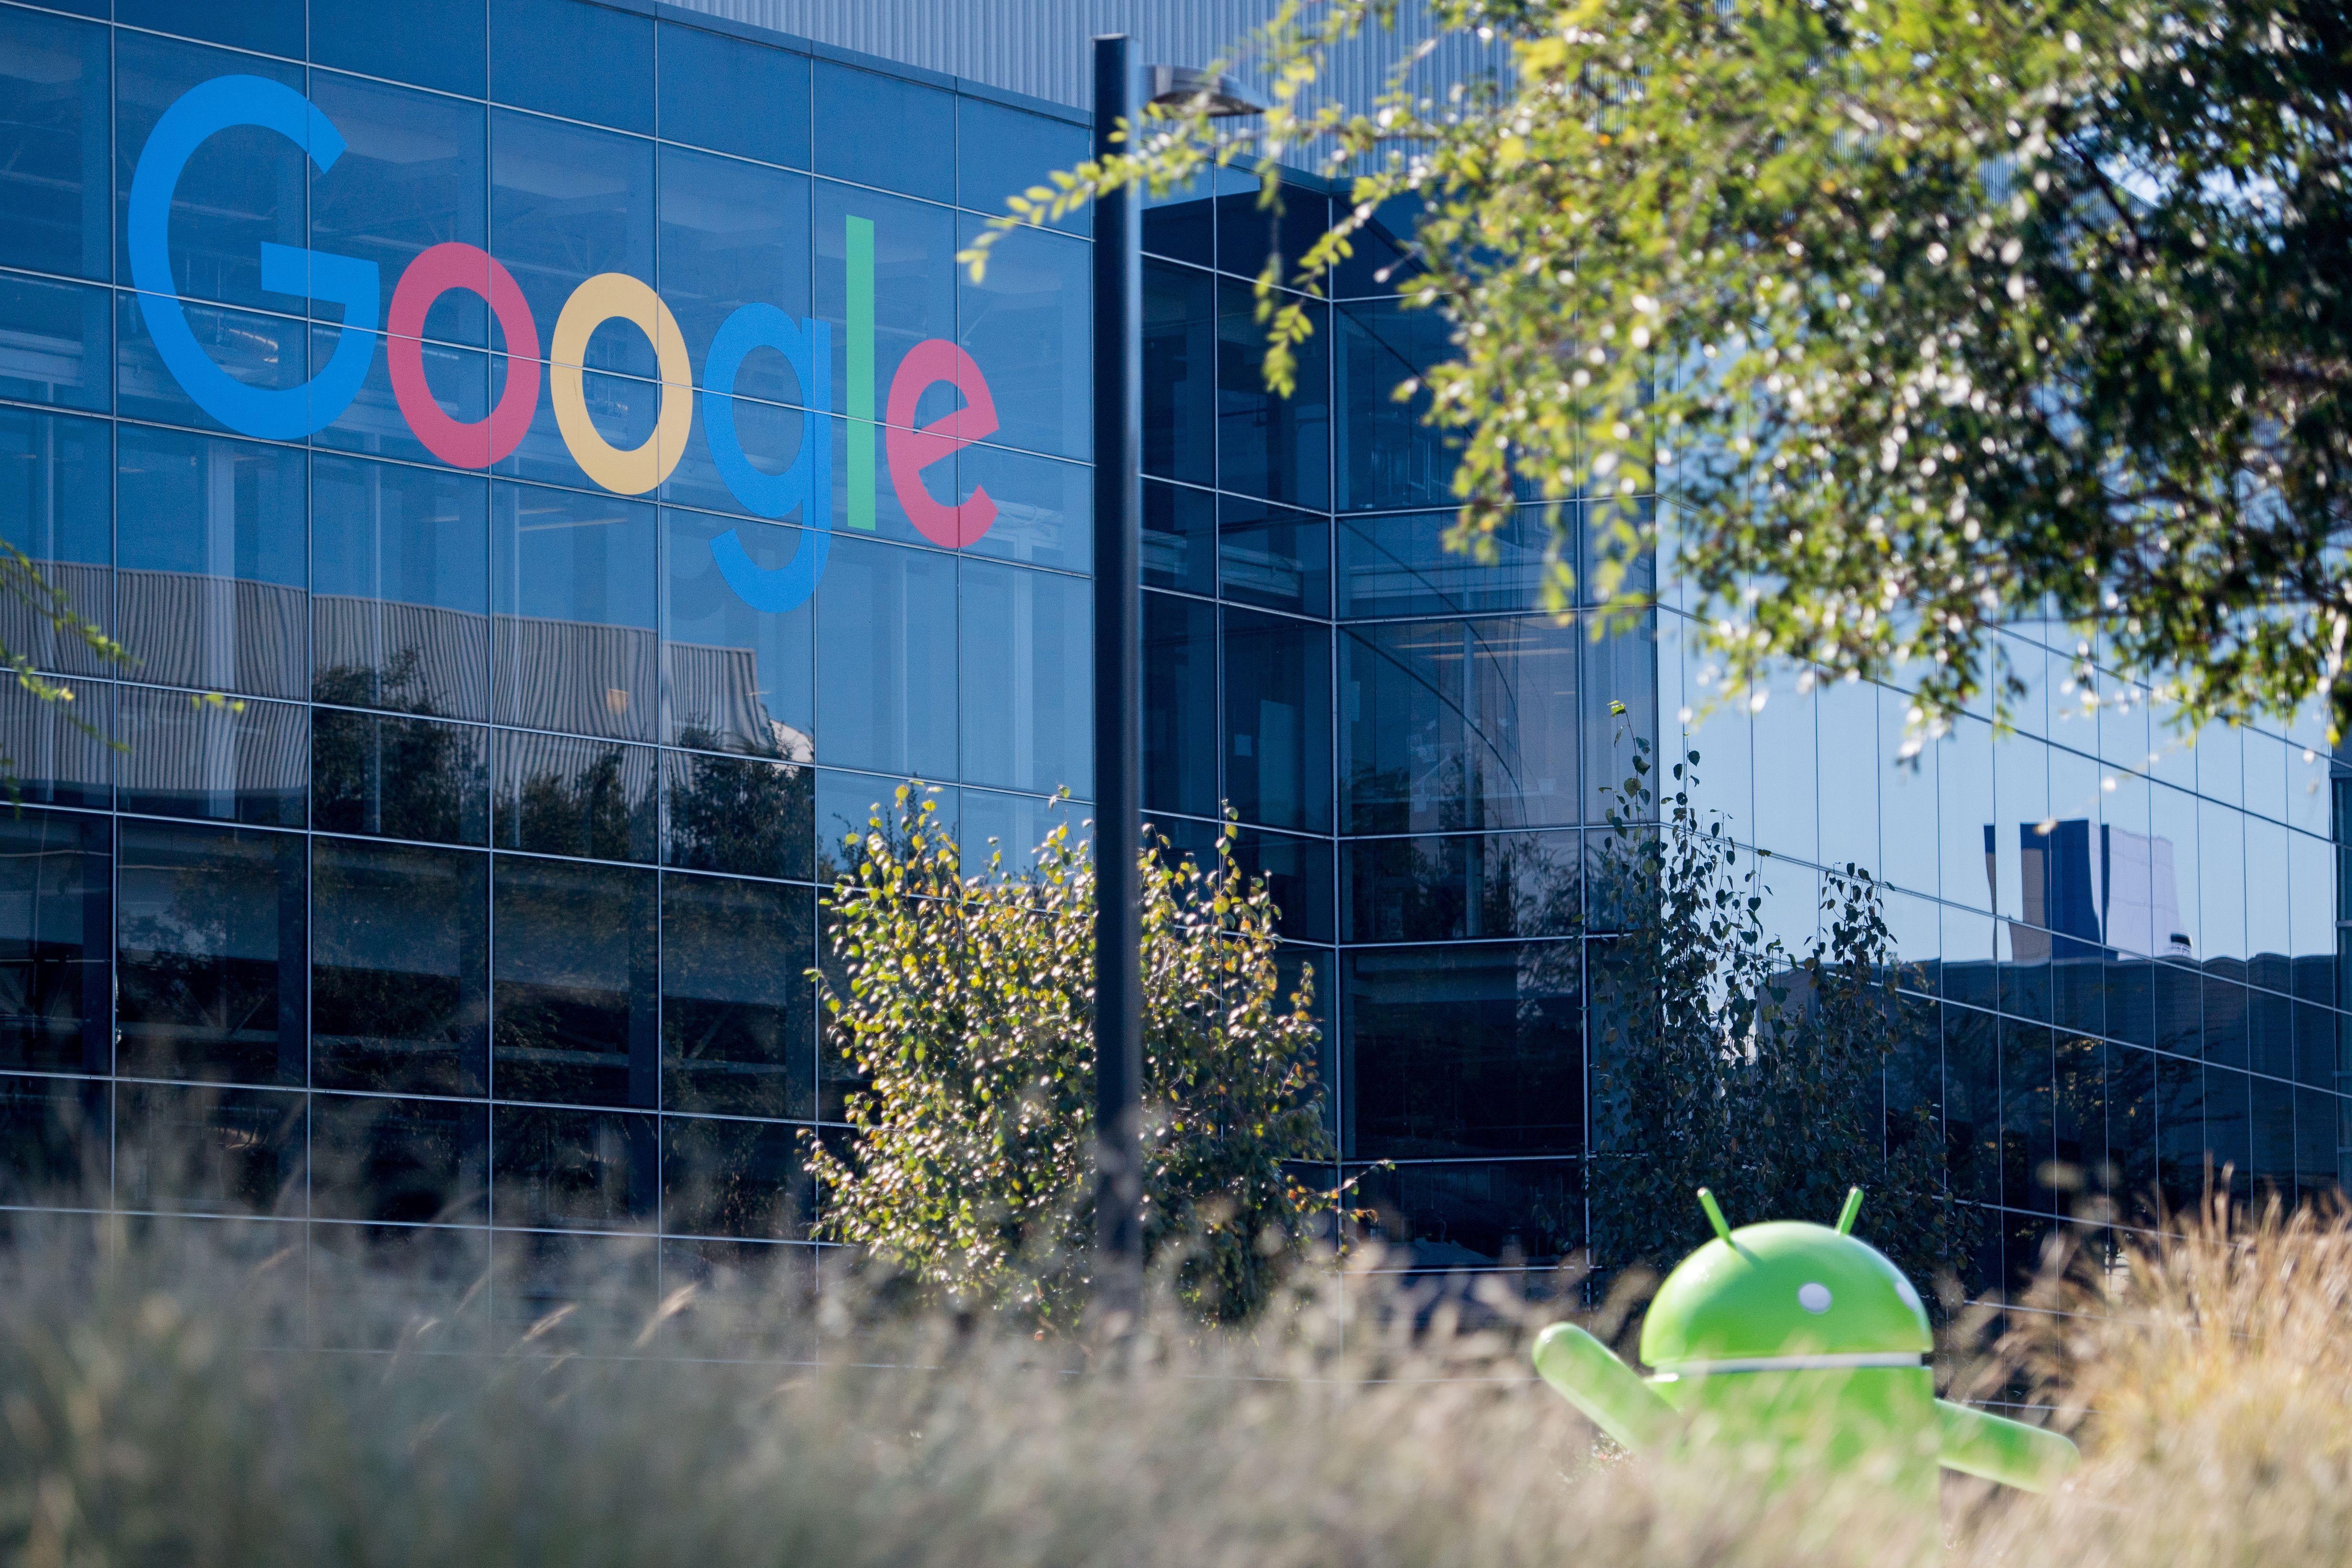 There have been four lawsuits filed against Google concerning workplace climate and politics. 